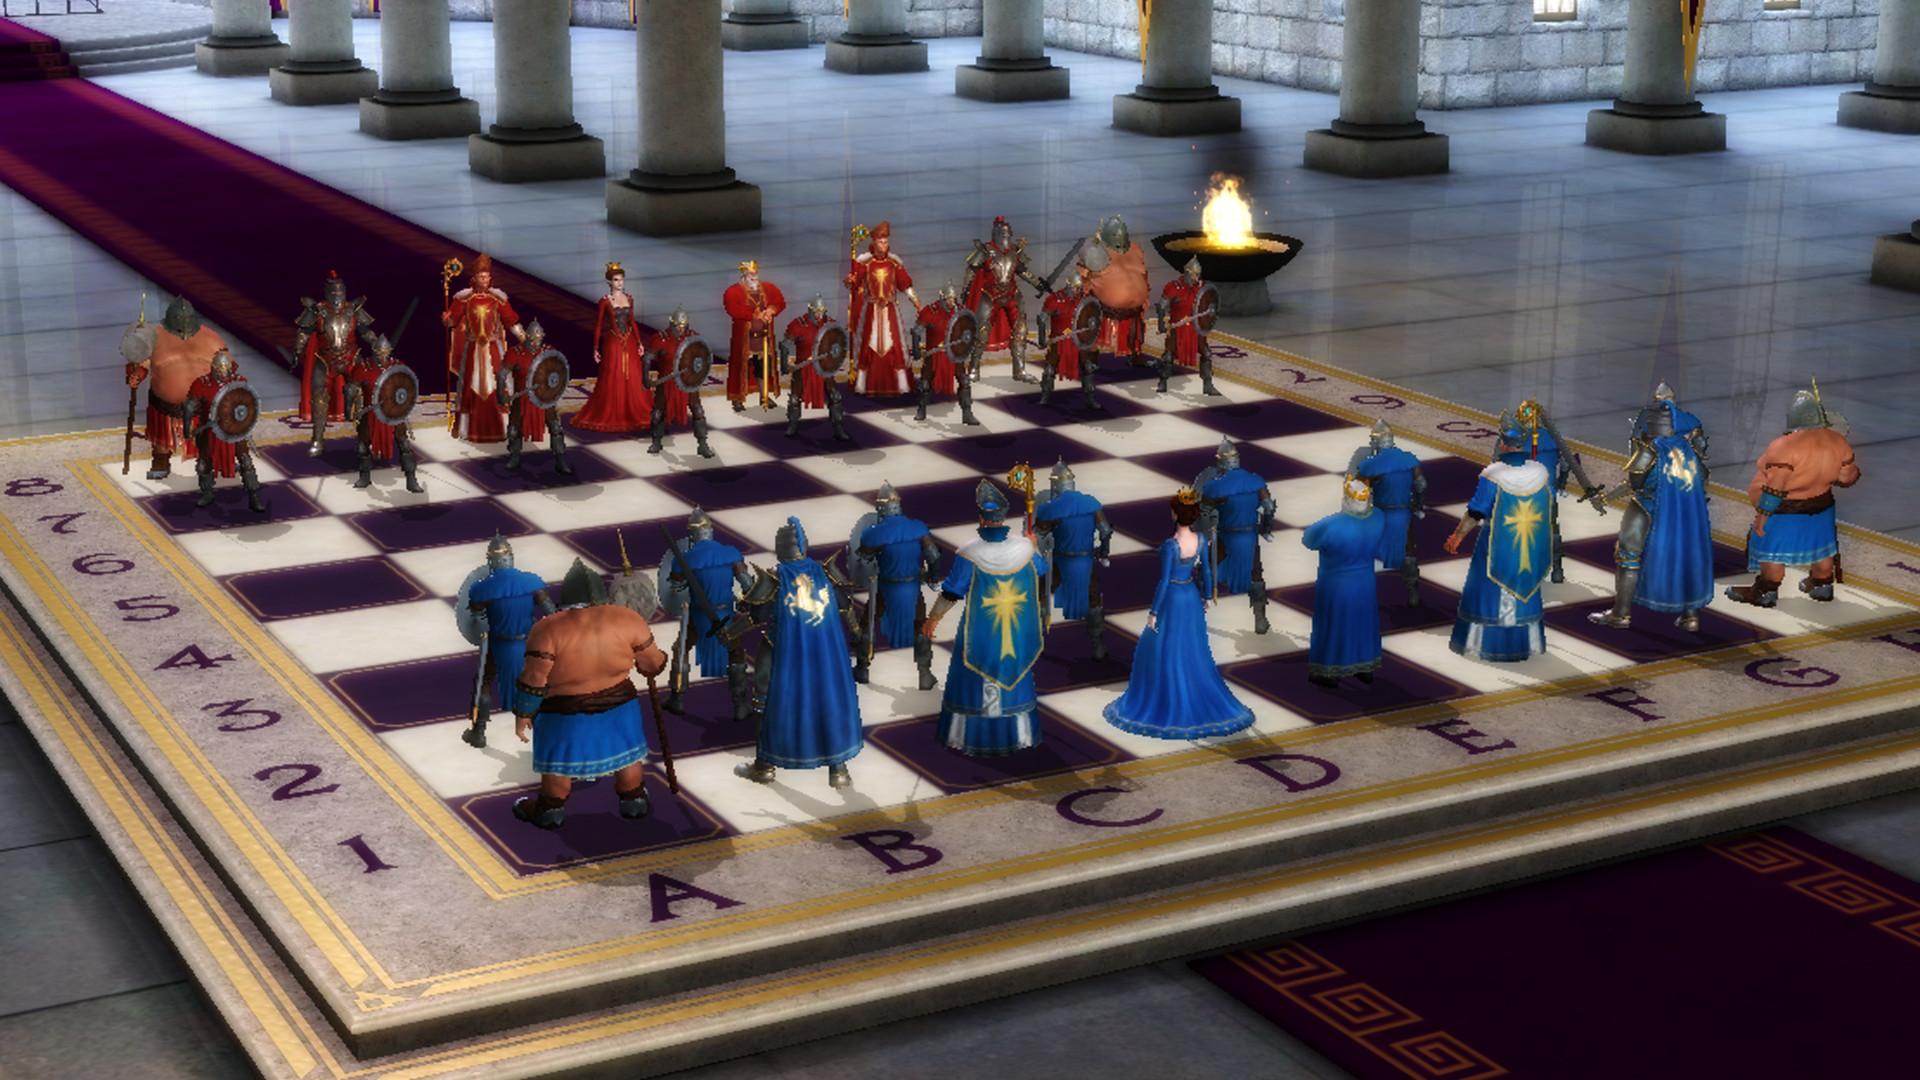 free chess games download